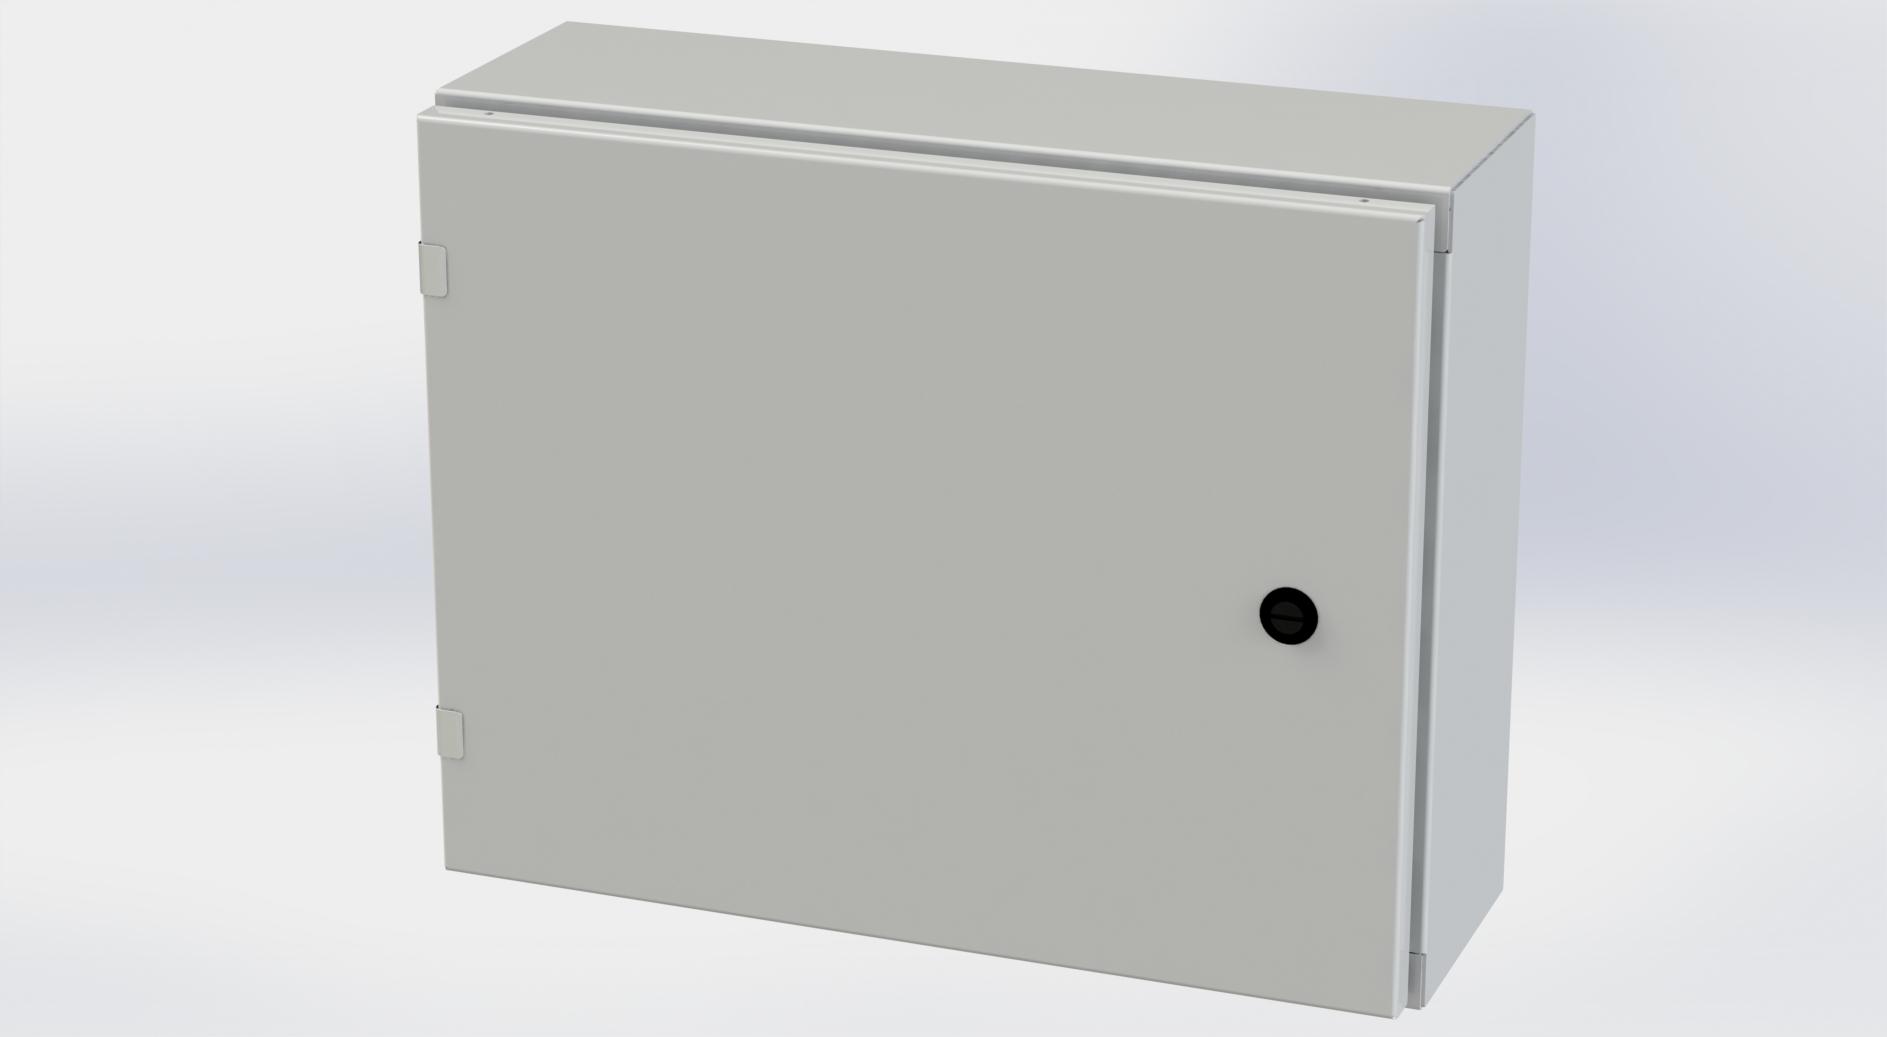 Saginaw Control SCE-16EL2006LPLG EL Enclosure, Height:16.00", Width:20.00", Depth:6.00", RAL 7035 gray powder coating inside and out. Optional sub-panels are powder coated white.